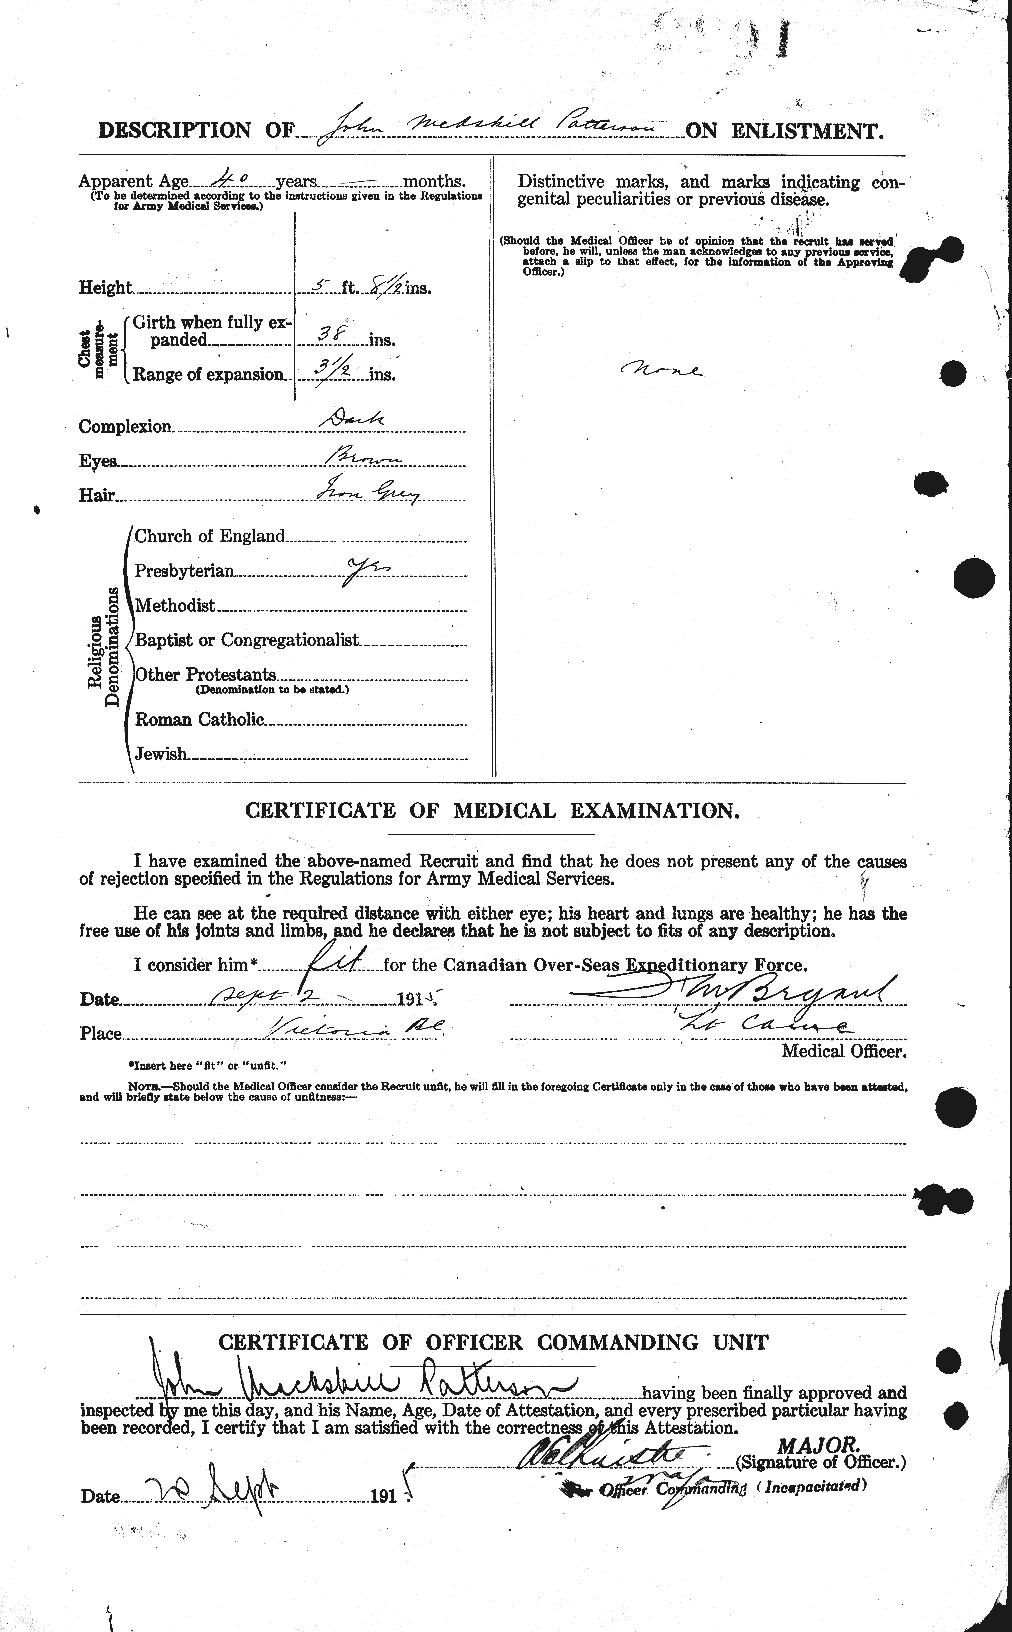 Personnel Records of the First World War - CEF 568605b